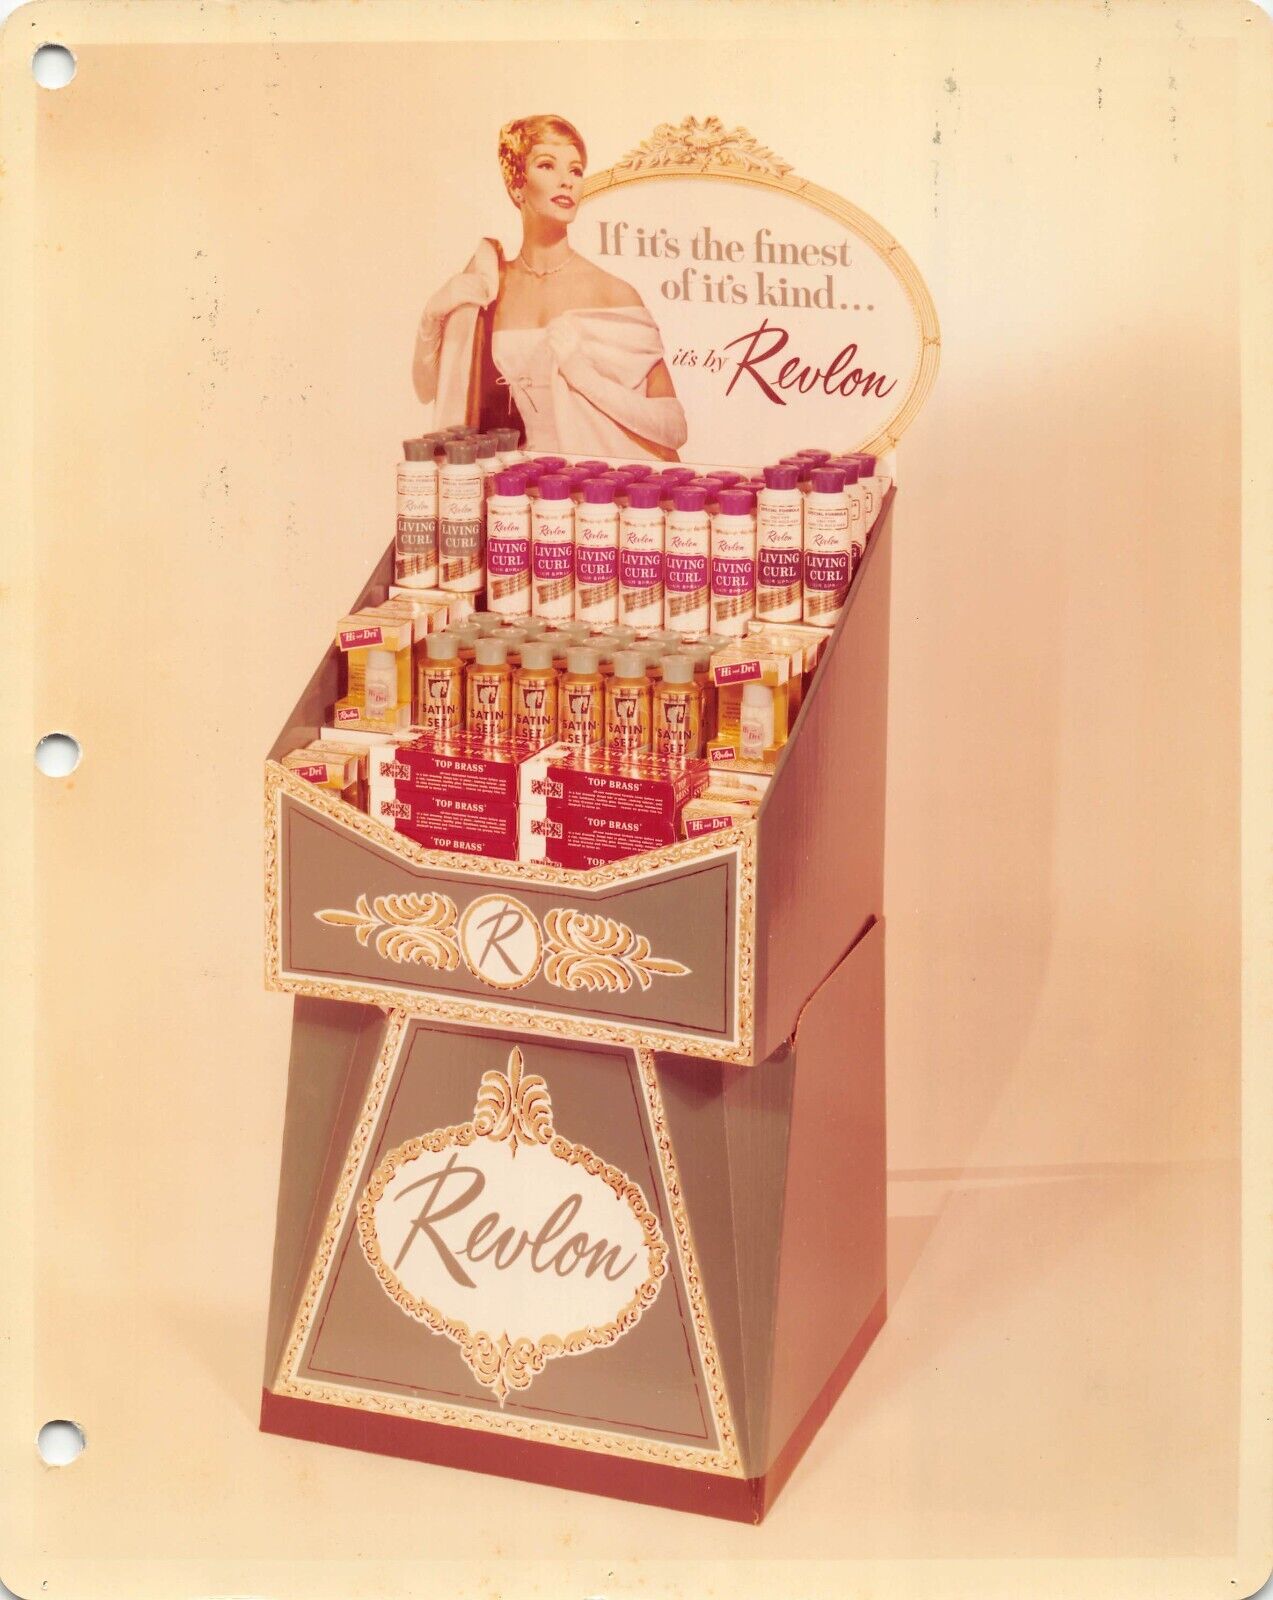 Revlon Hair Curl Products Vintage Fashion Store Display Advertising Photo 1960s